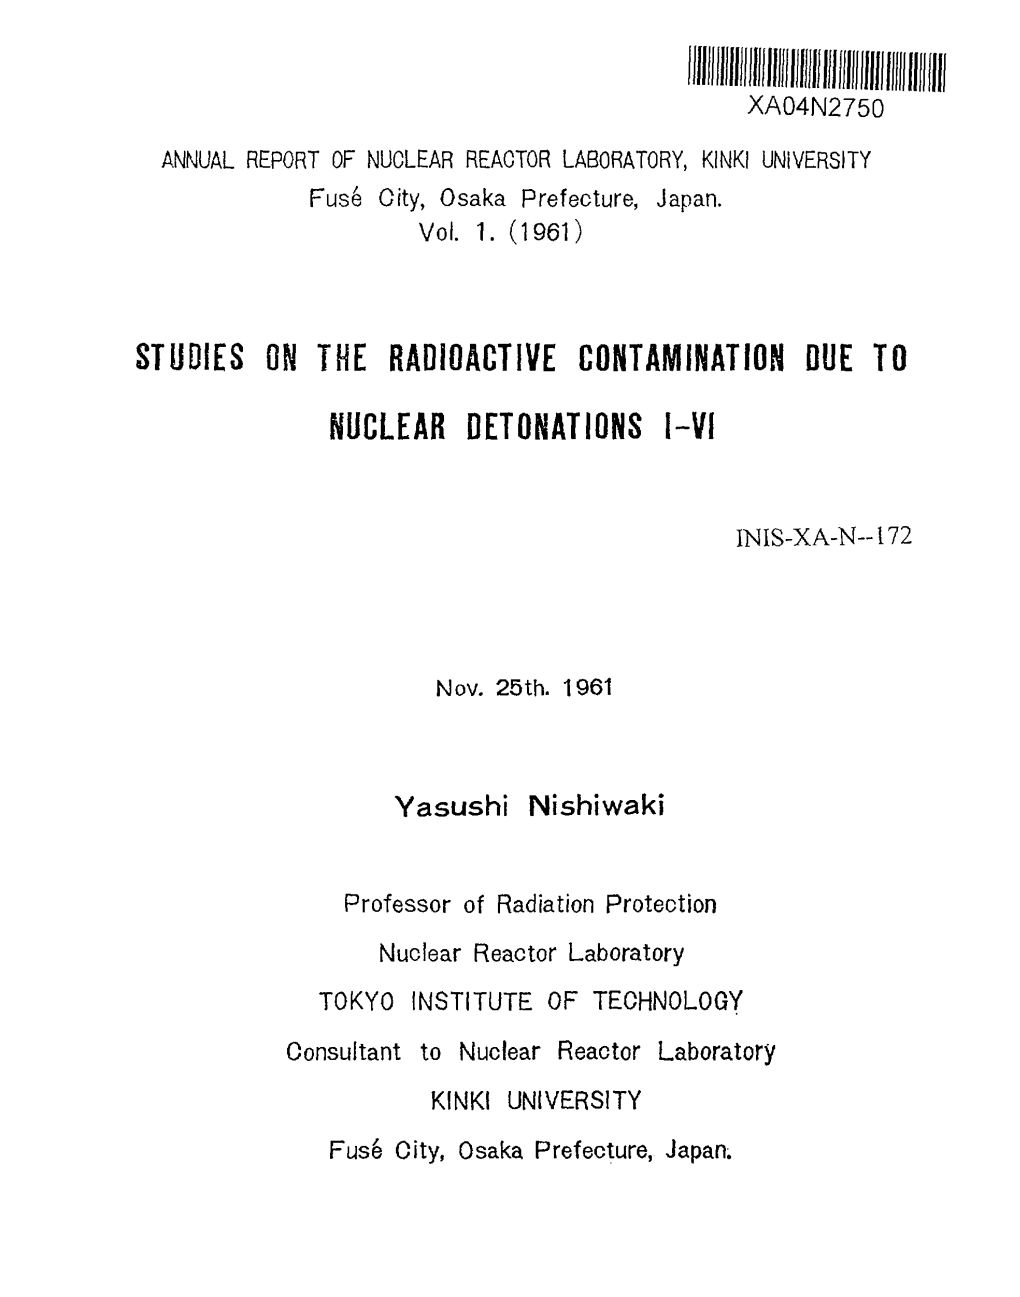 Studies on the Radioactive Contamination Due to Nuclear Detonations I-Vi